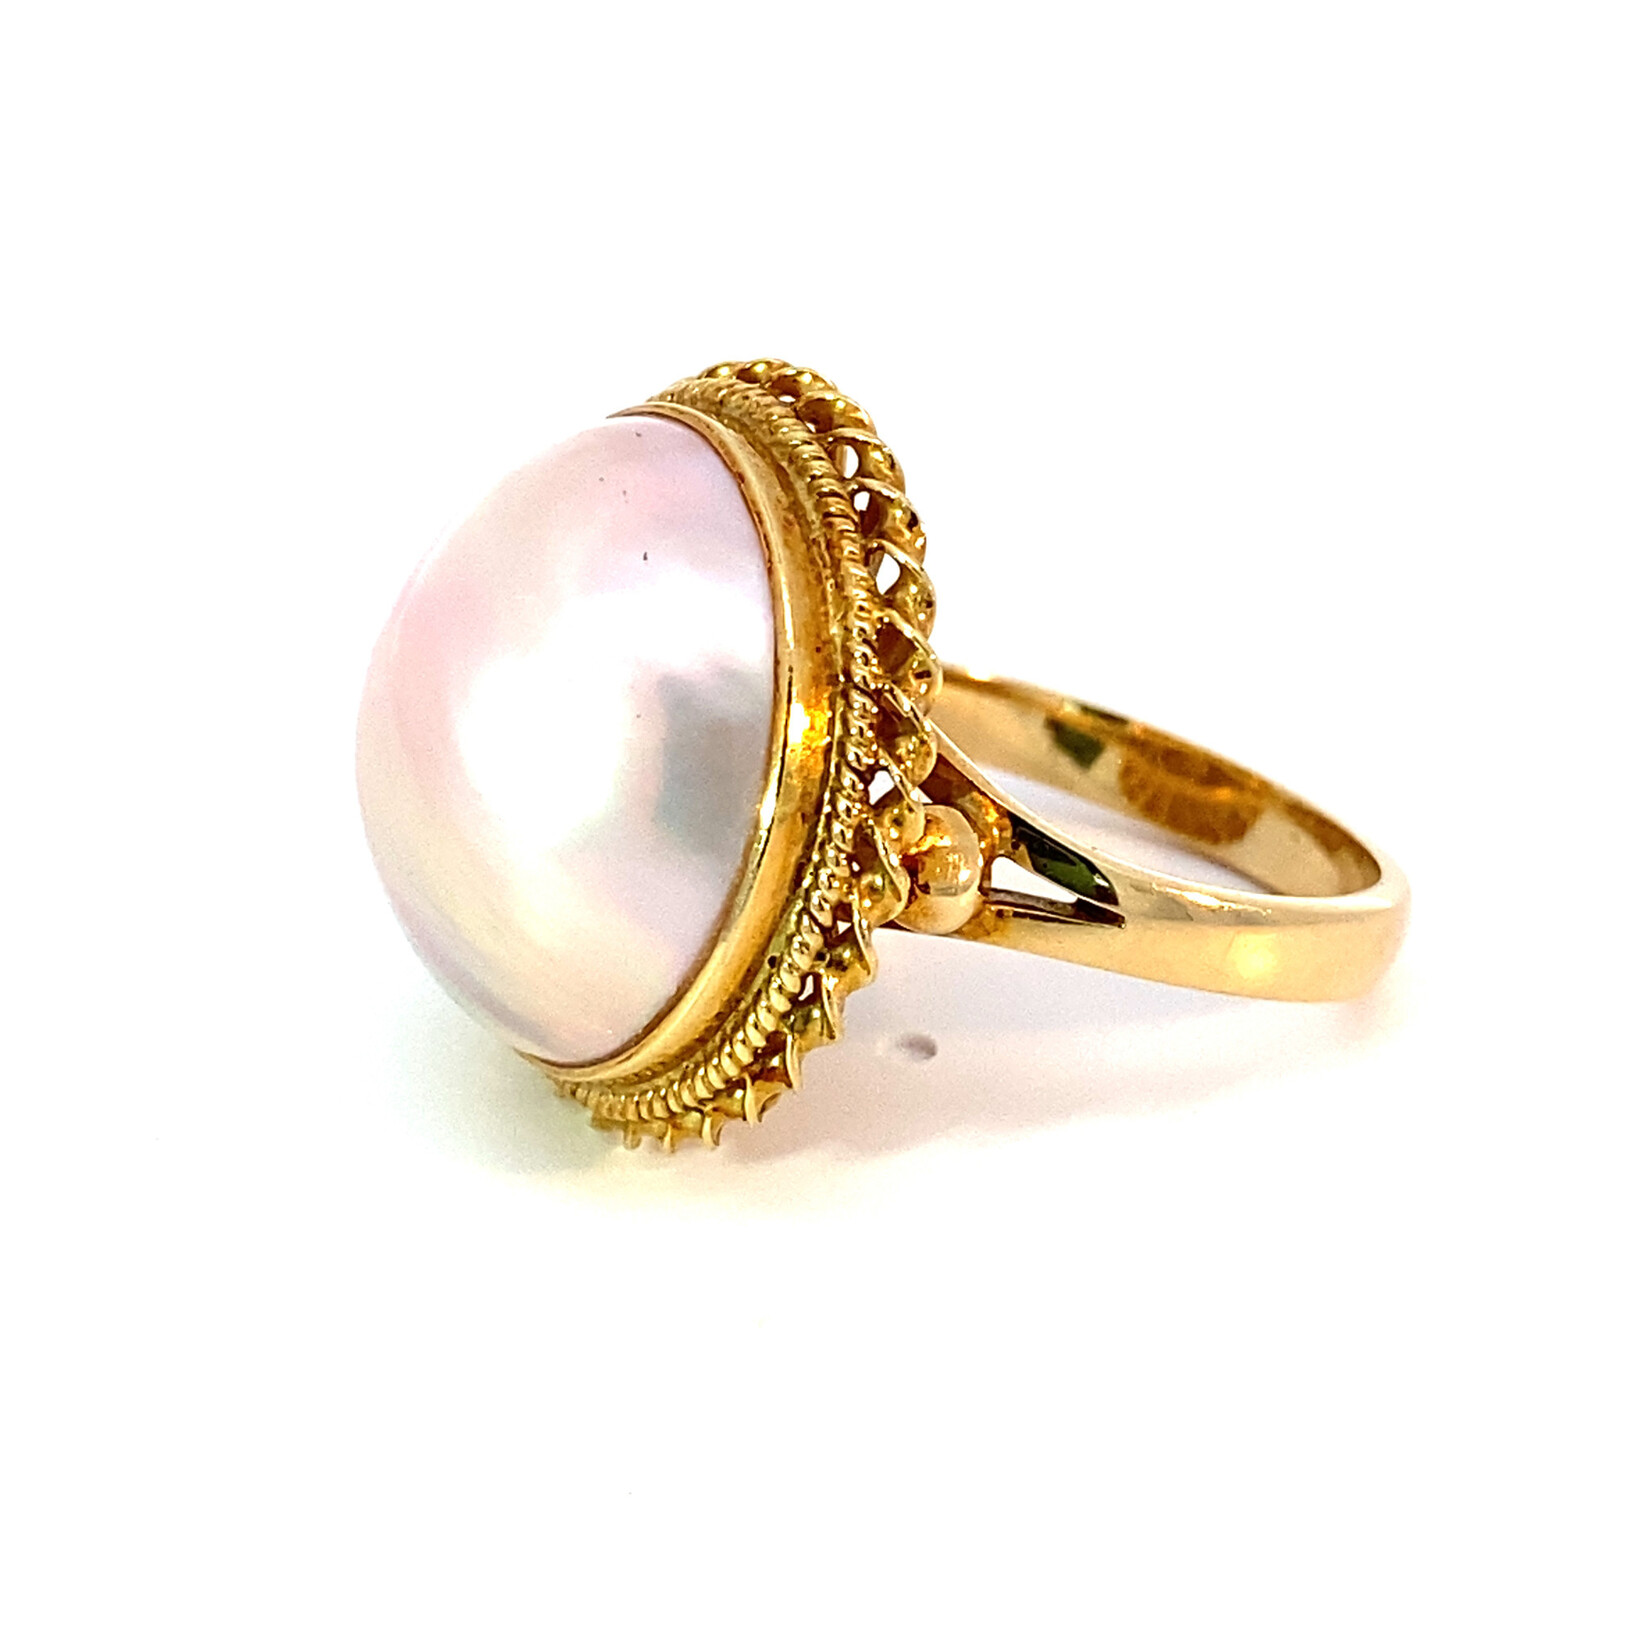 14K Yellow Gold Dyed Cultured Mabe Pearl Ring size 7.25